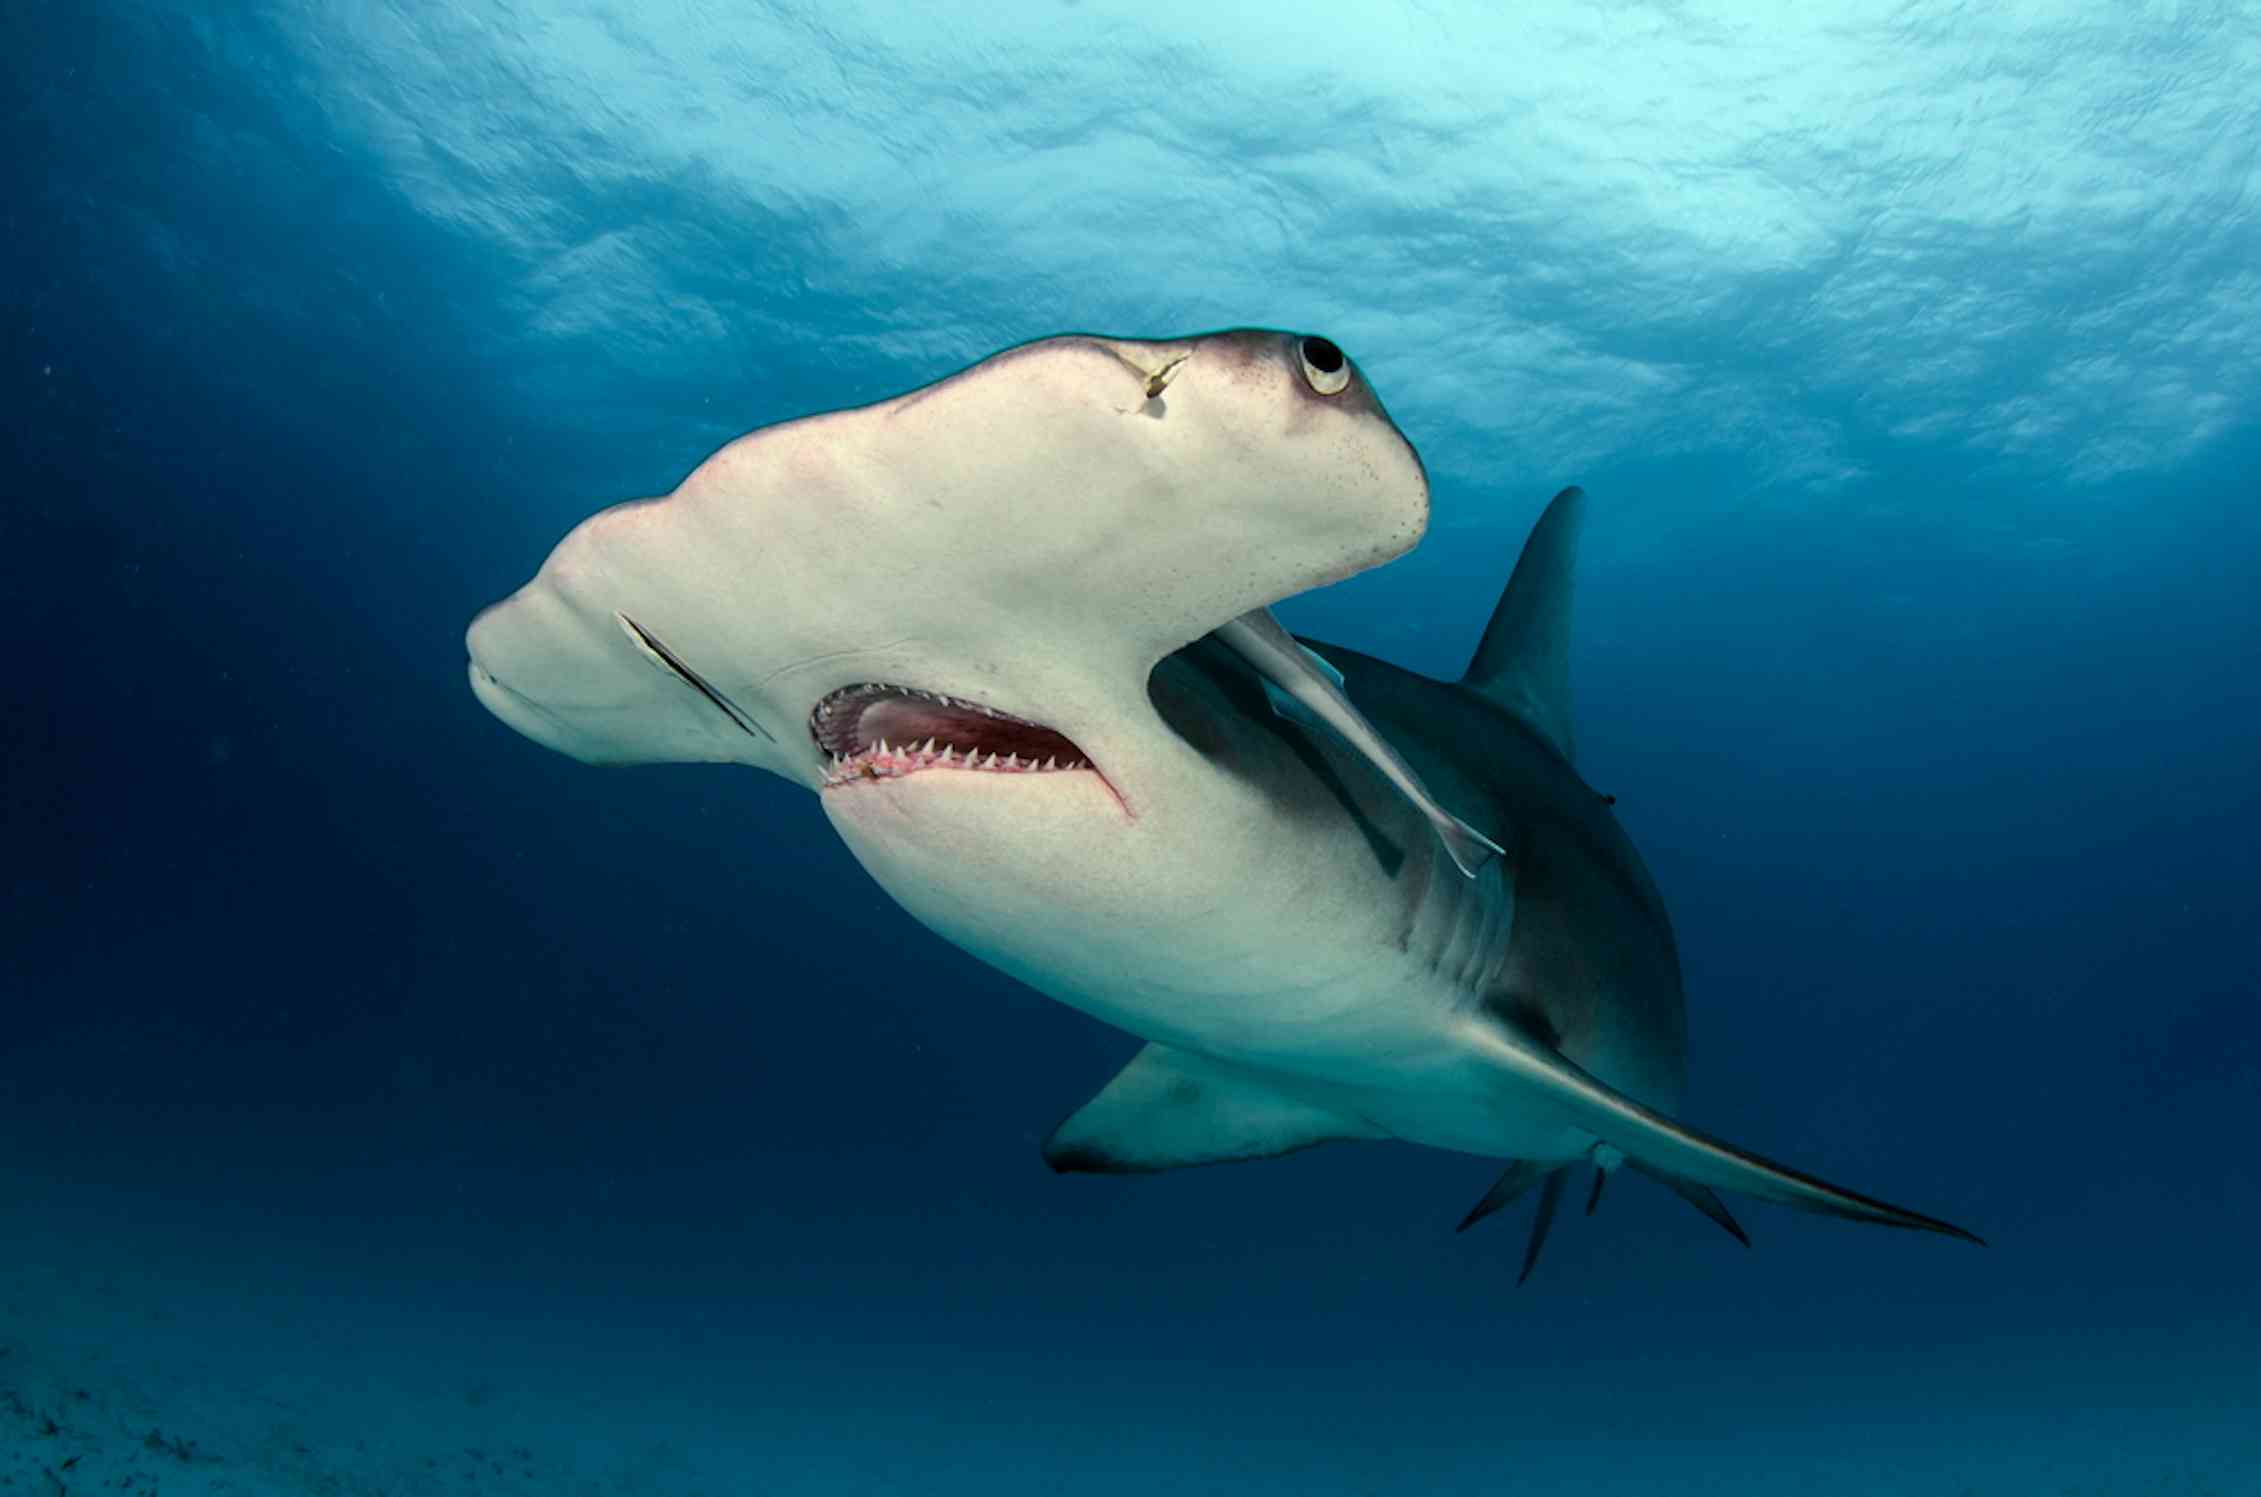 New large shark species heading for the UK? That's no cause for panic